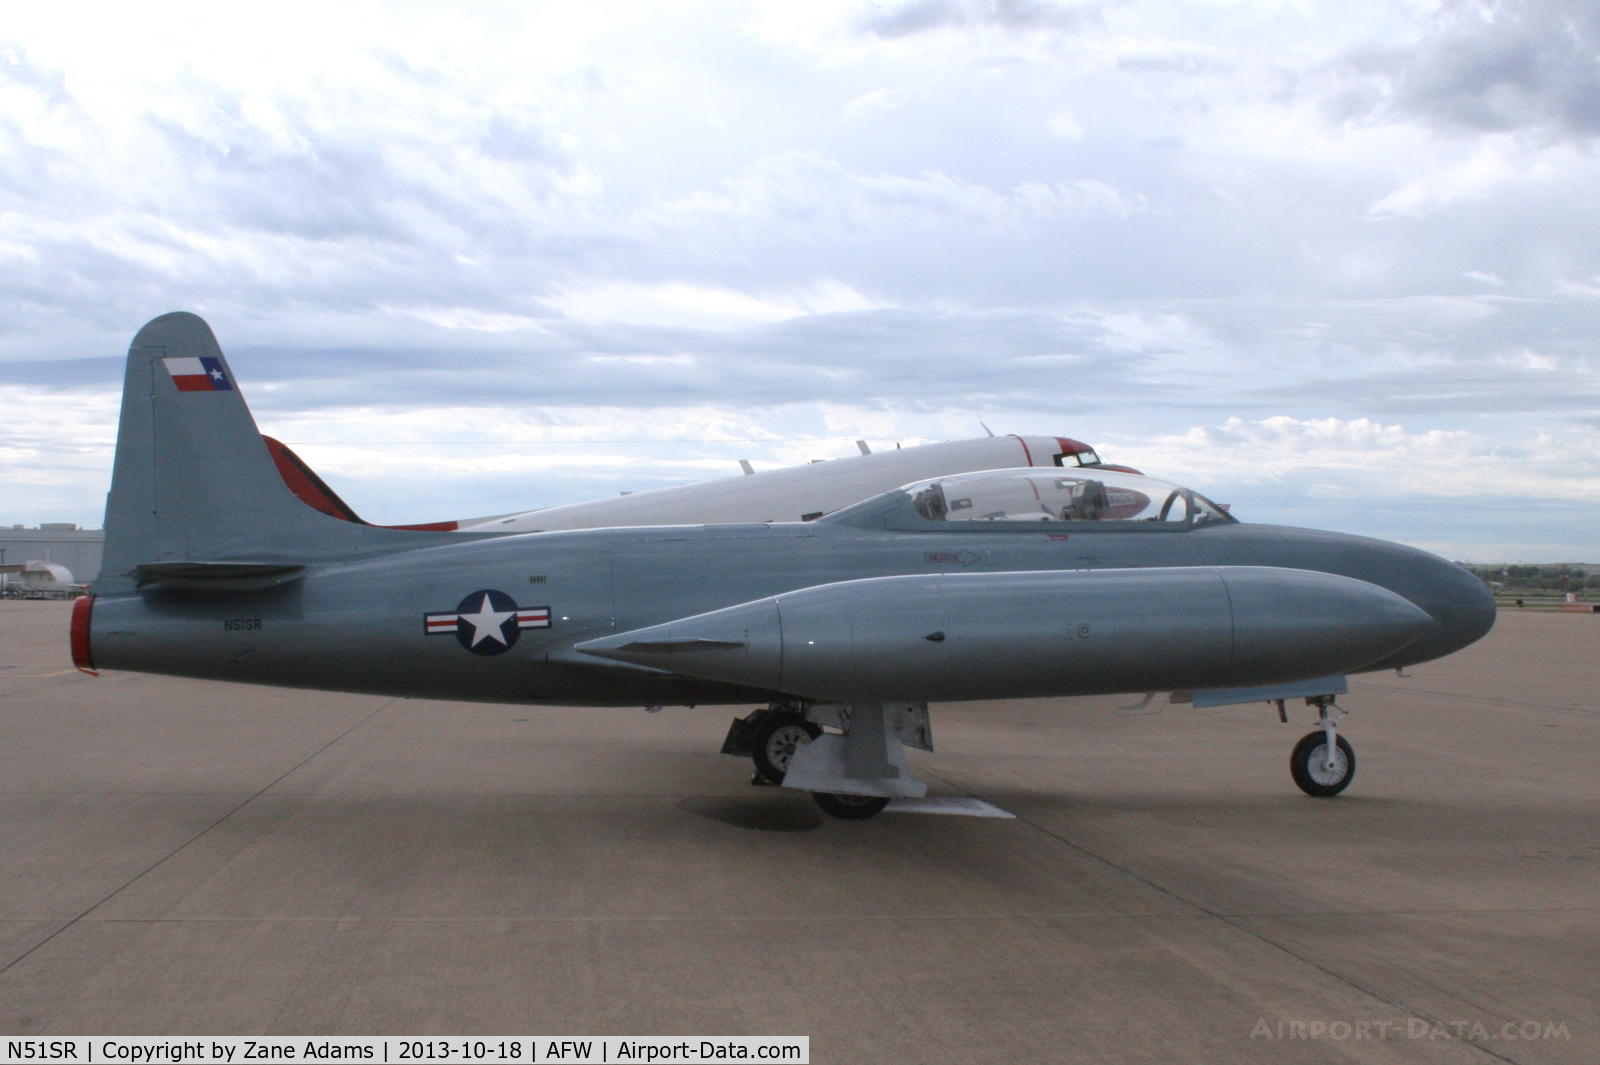 N51SR, 1952 Lockheed T-33A C/N 0451, On display at the 2013 Fort Worth Alliance Airshow